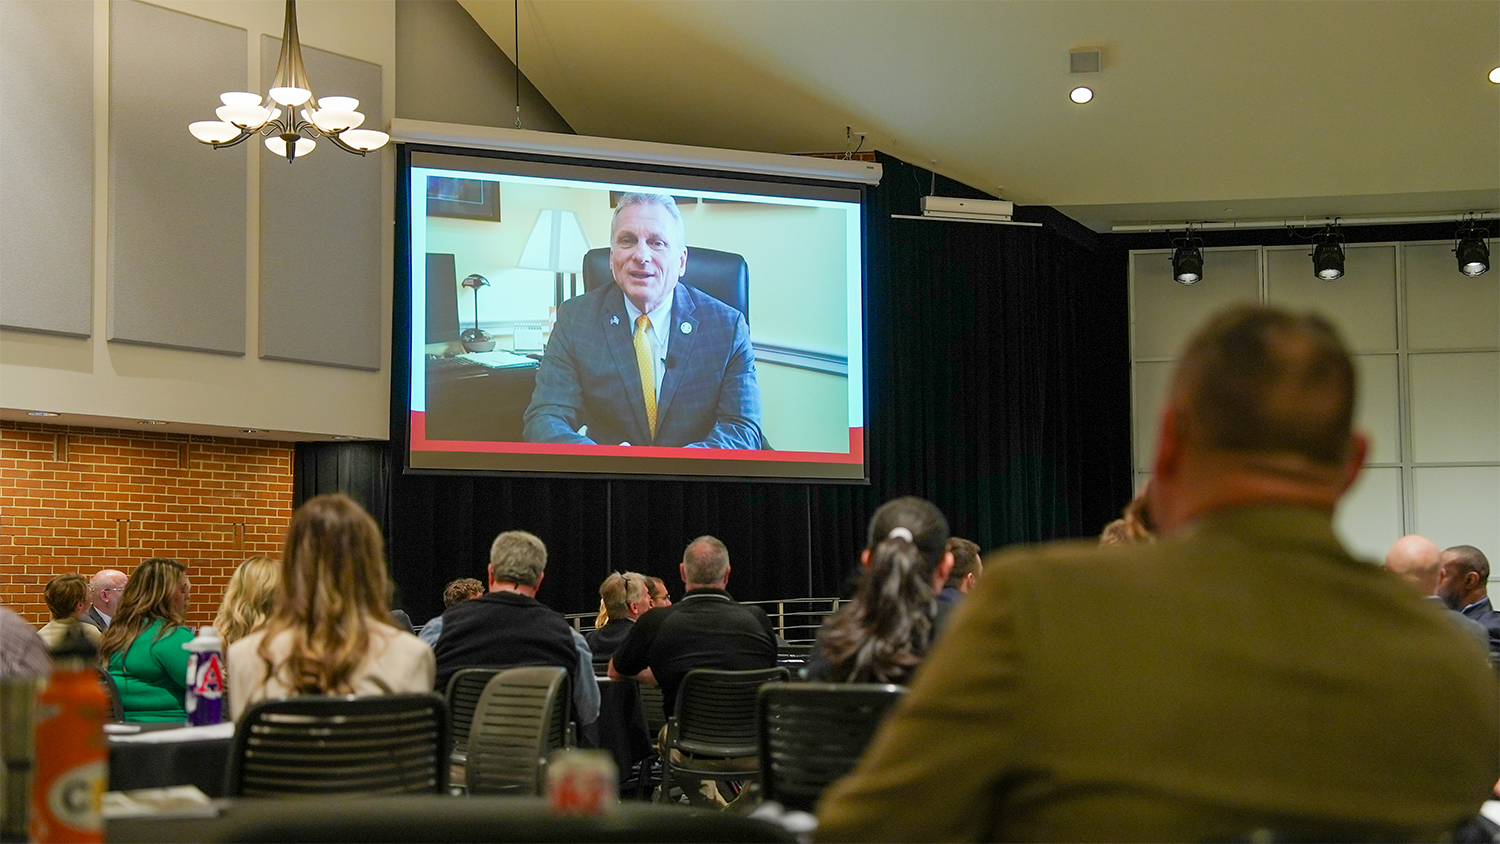 The University of Georgia recently hosted the Southeastern Defense Communities Workshop in Athens. The event brought together military personnel, resilience experts and researchers from across the southeast to discuss solutions to strengthen military installations and their surrounding communities. Above, Rep. Buddy Carter (GA-01), gives a welcome via video. At top, Rachel Jacobson, assistant secretary of the Army for Installations, Energy and Environment, gives the keynote address.